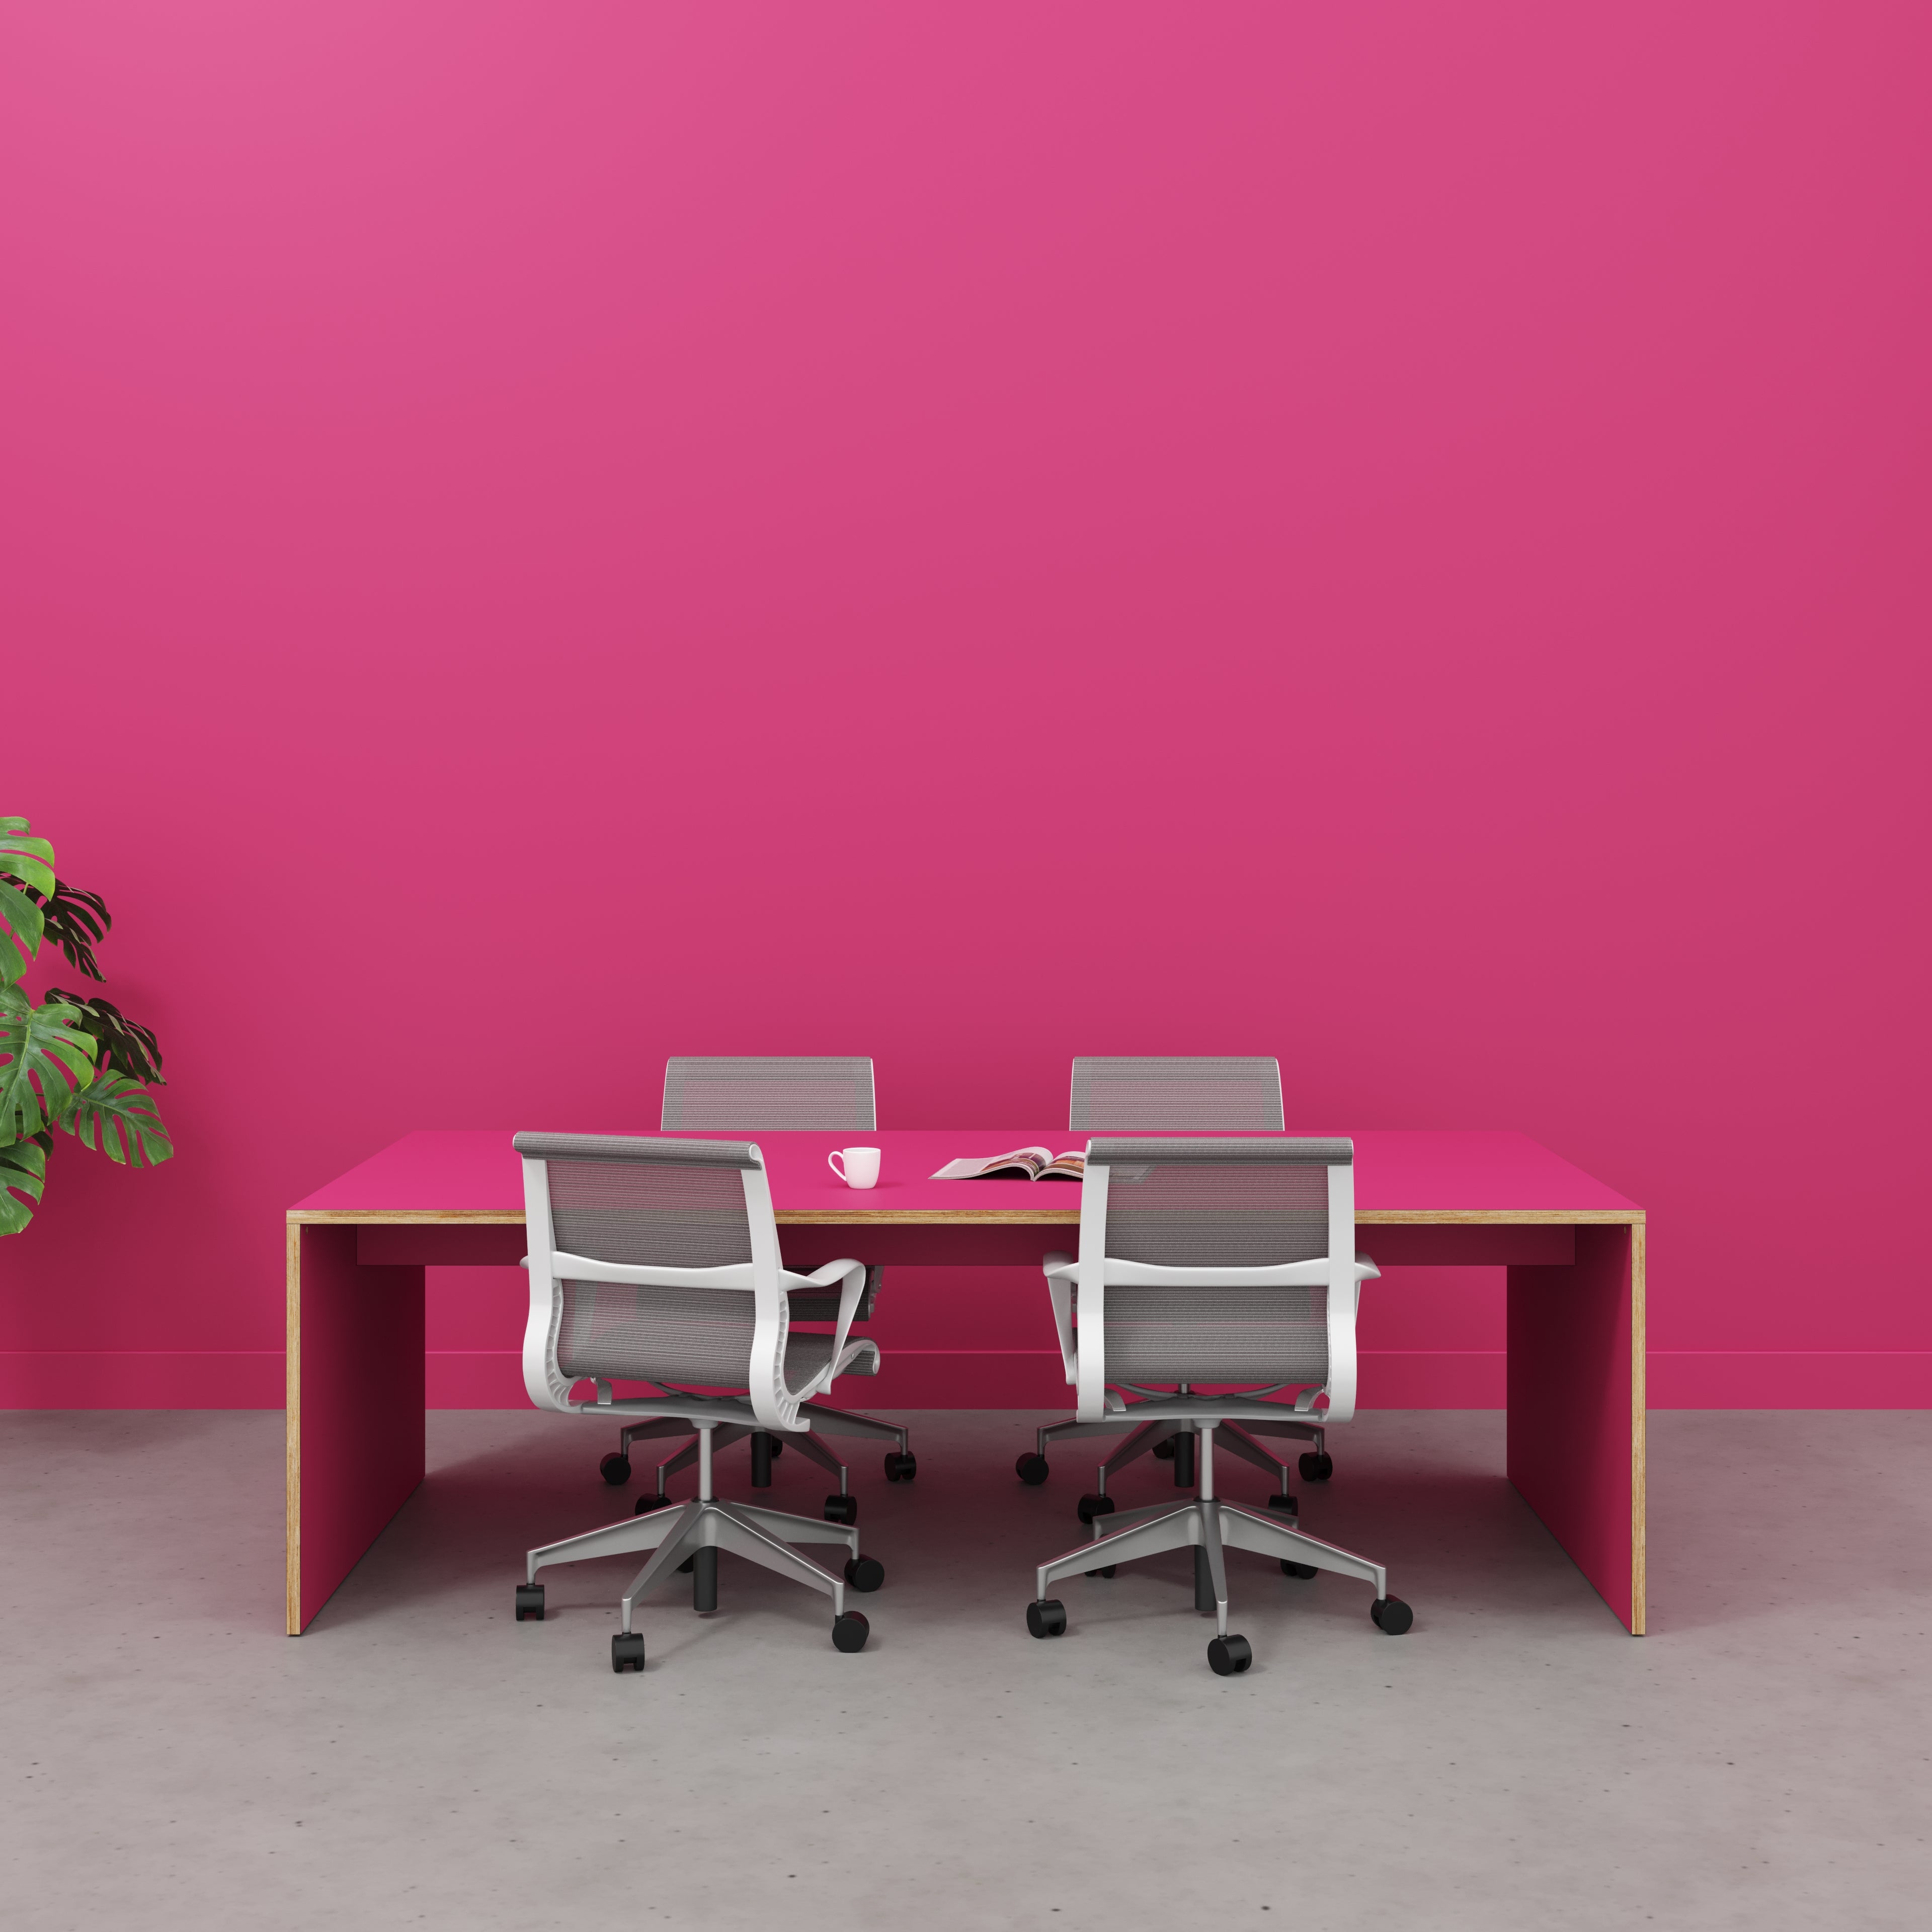 Table with Solid Sides - Formica Juicy Pink - 2400(w) x 1200(d) x 750(h)